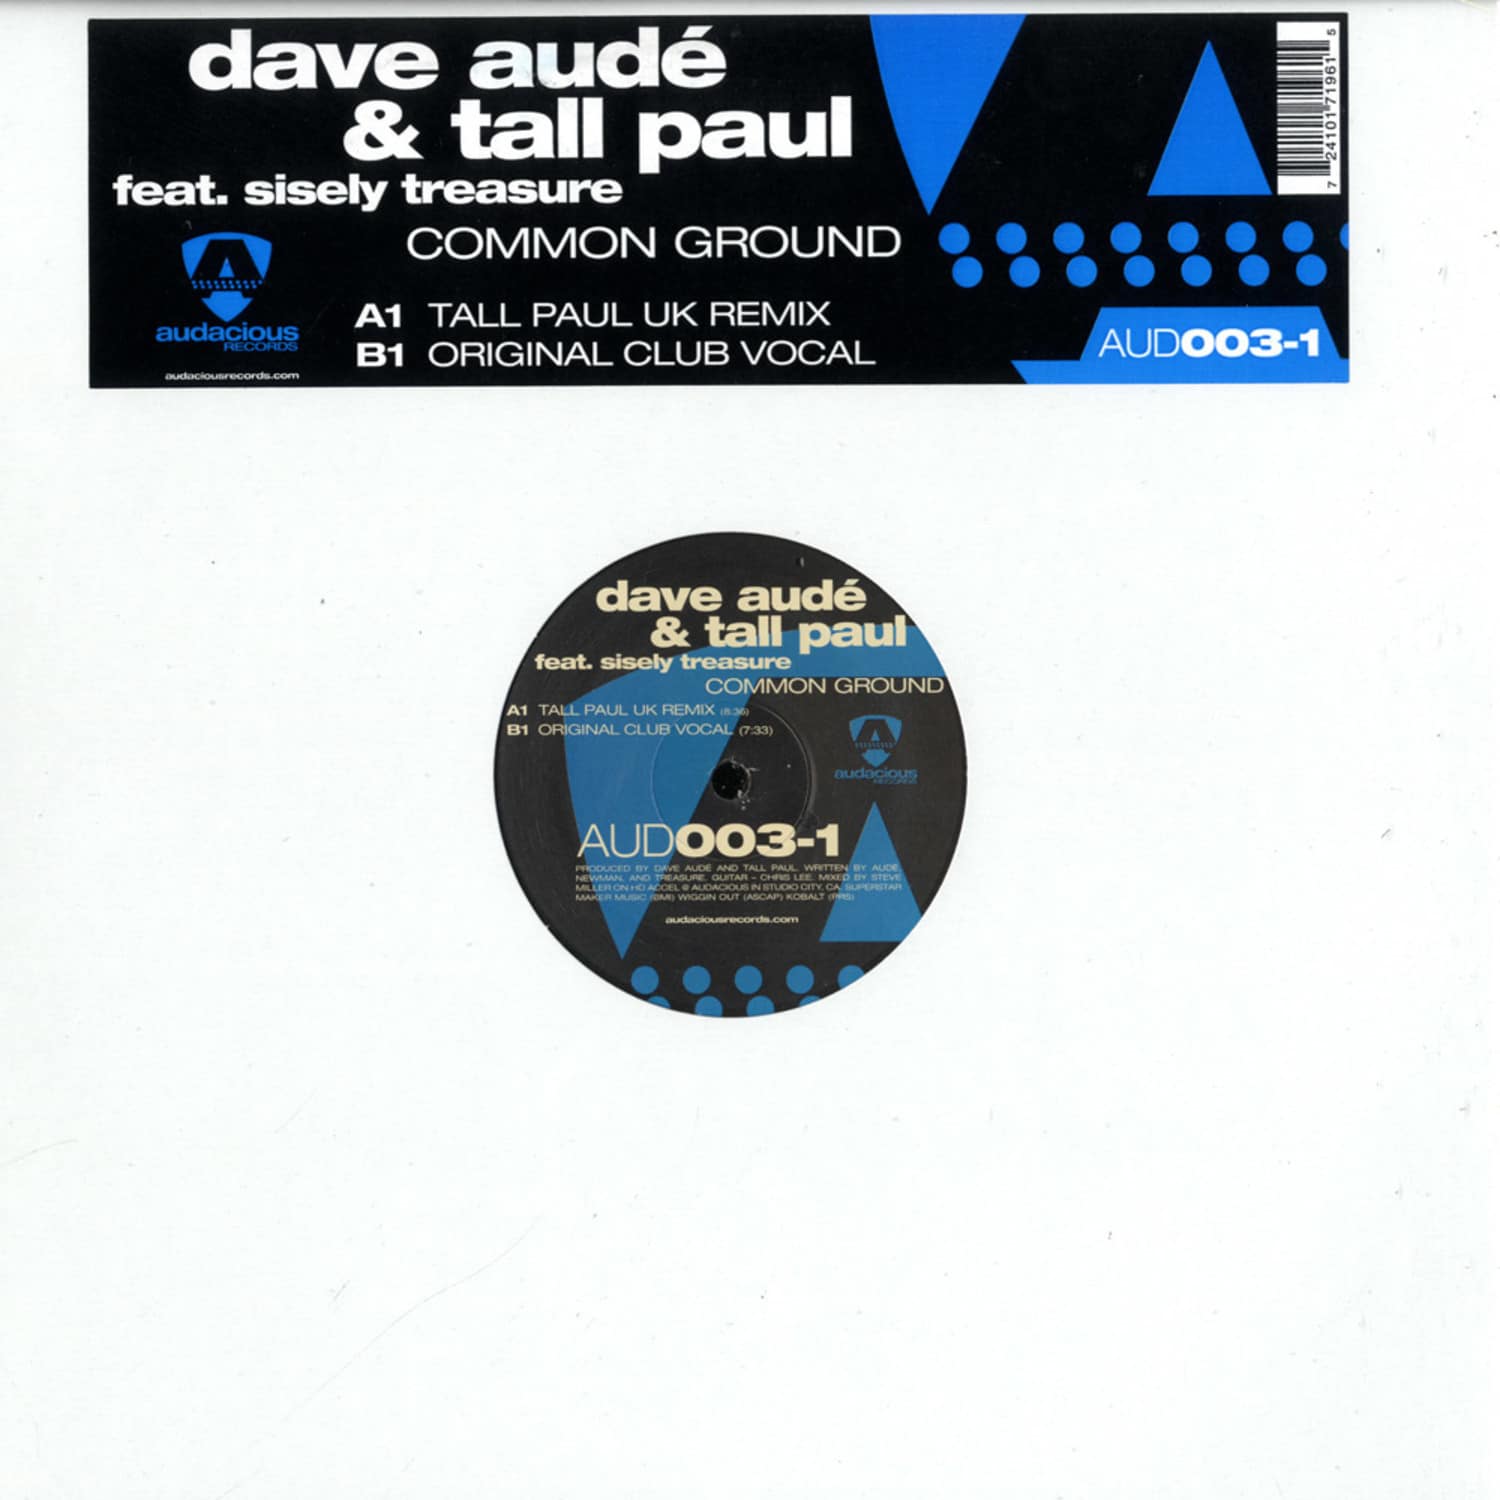 Tall Pall & Dave Aud - COMMON GROUND